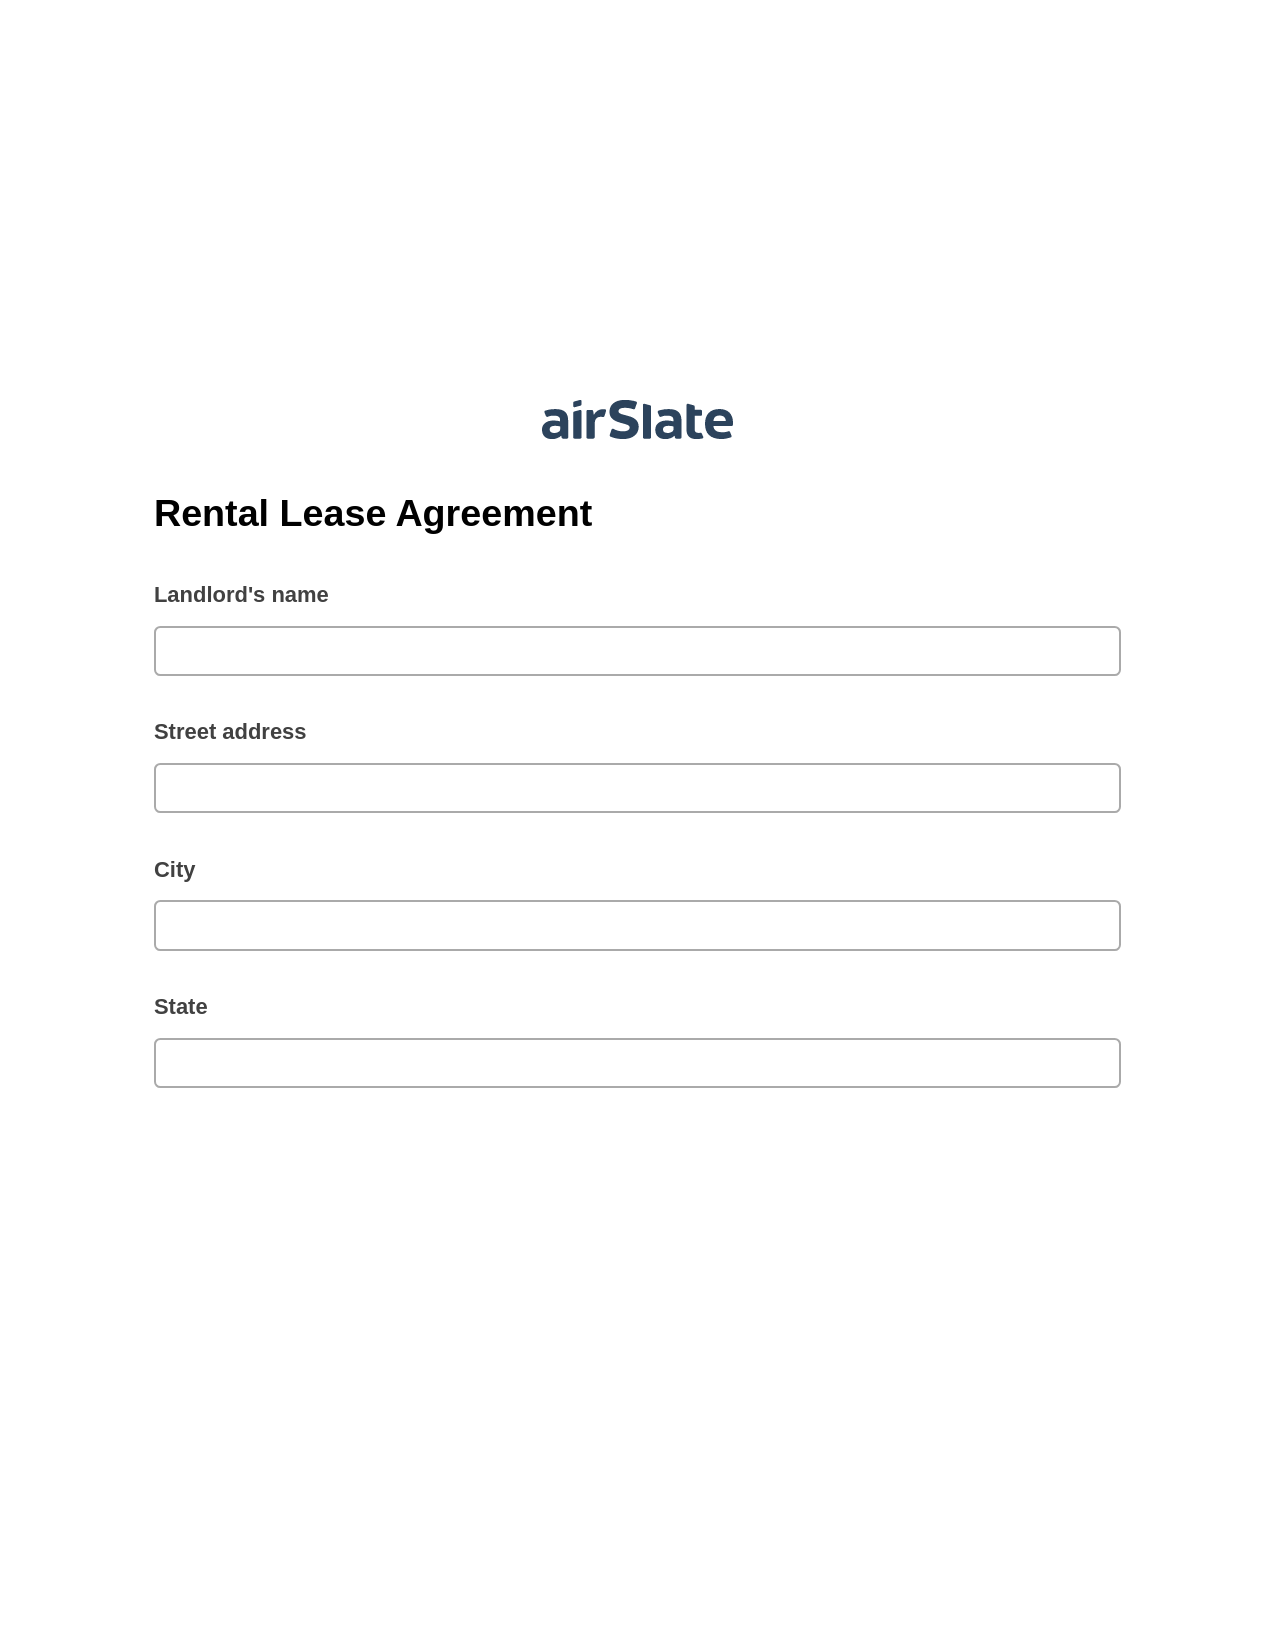 Multirole Rental Lease Agreement Pre-fill from CSV File Dropdown Options Bot, Roles Reminder Bot, Email Notification Postfinish Bot